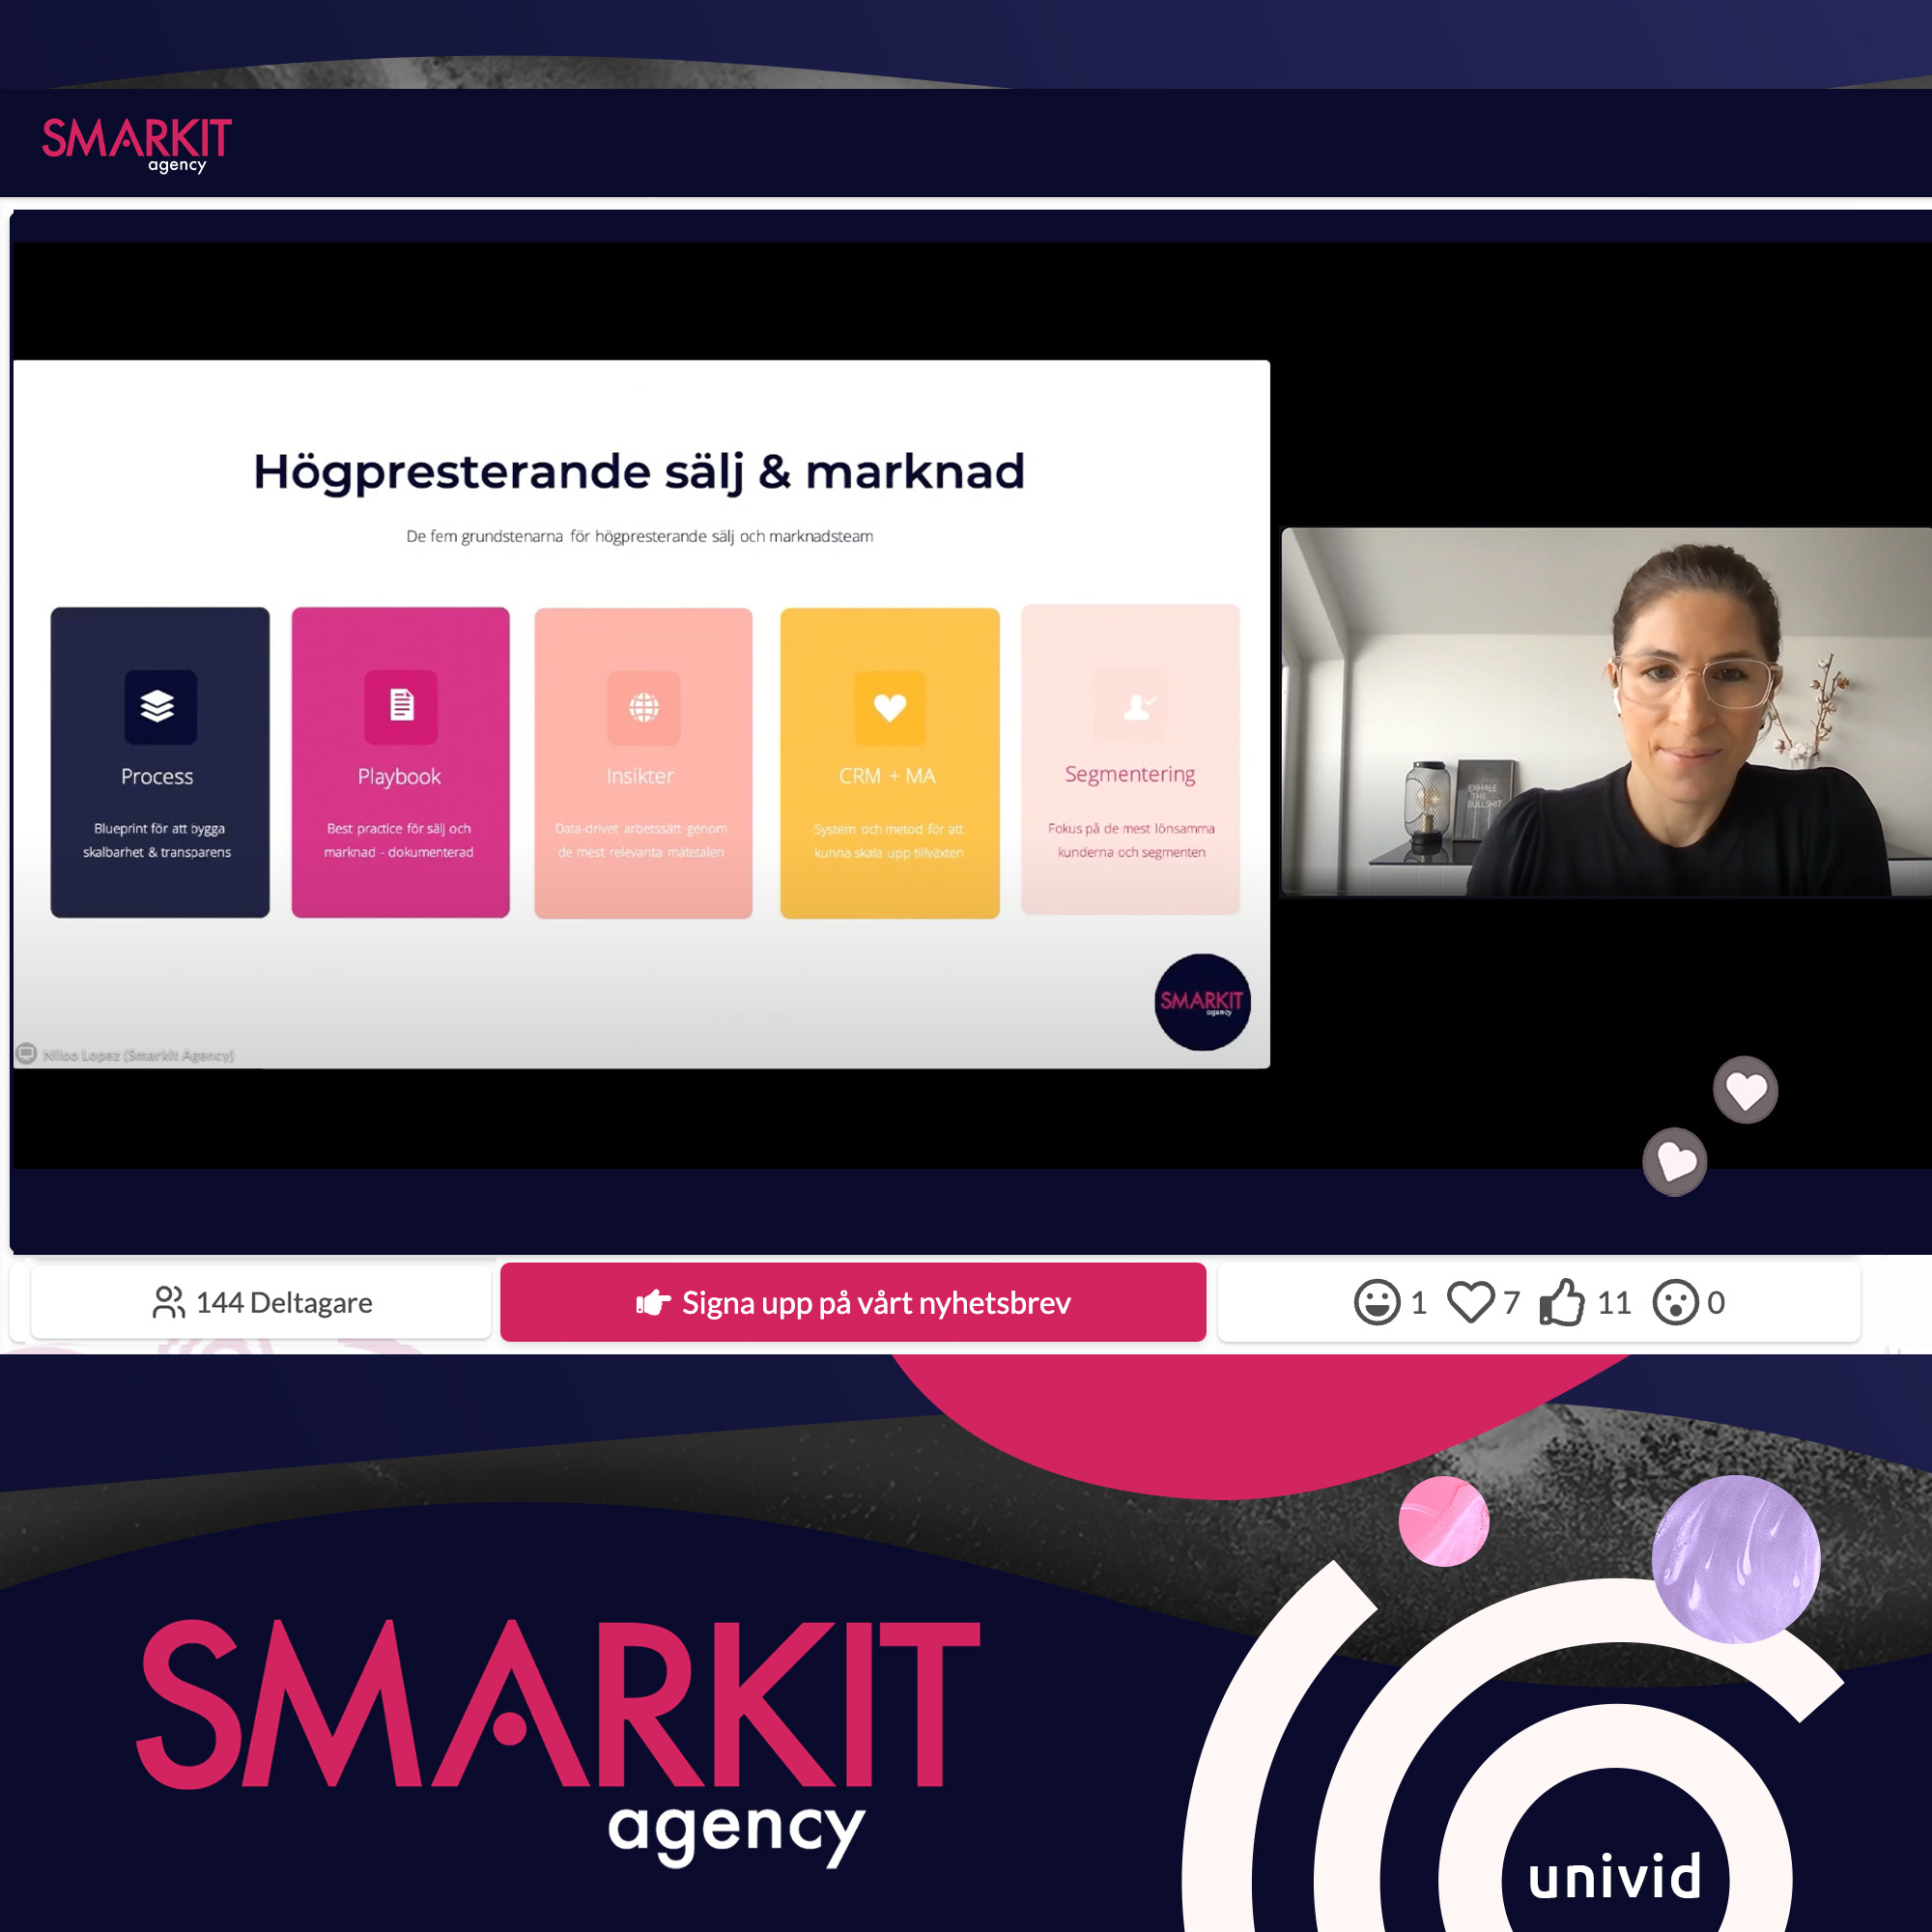 Smarkit Agency hosts 30 min power breakfast webinars on hot topics in growth and marketing - such as how to coordinate sales and marketing, or practical ways to have LinkedIn be a top performing sales channel. Interactive with chat/Q&A, live reactions and lots of interesting polls.